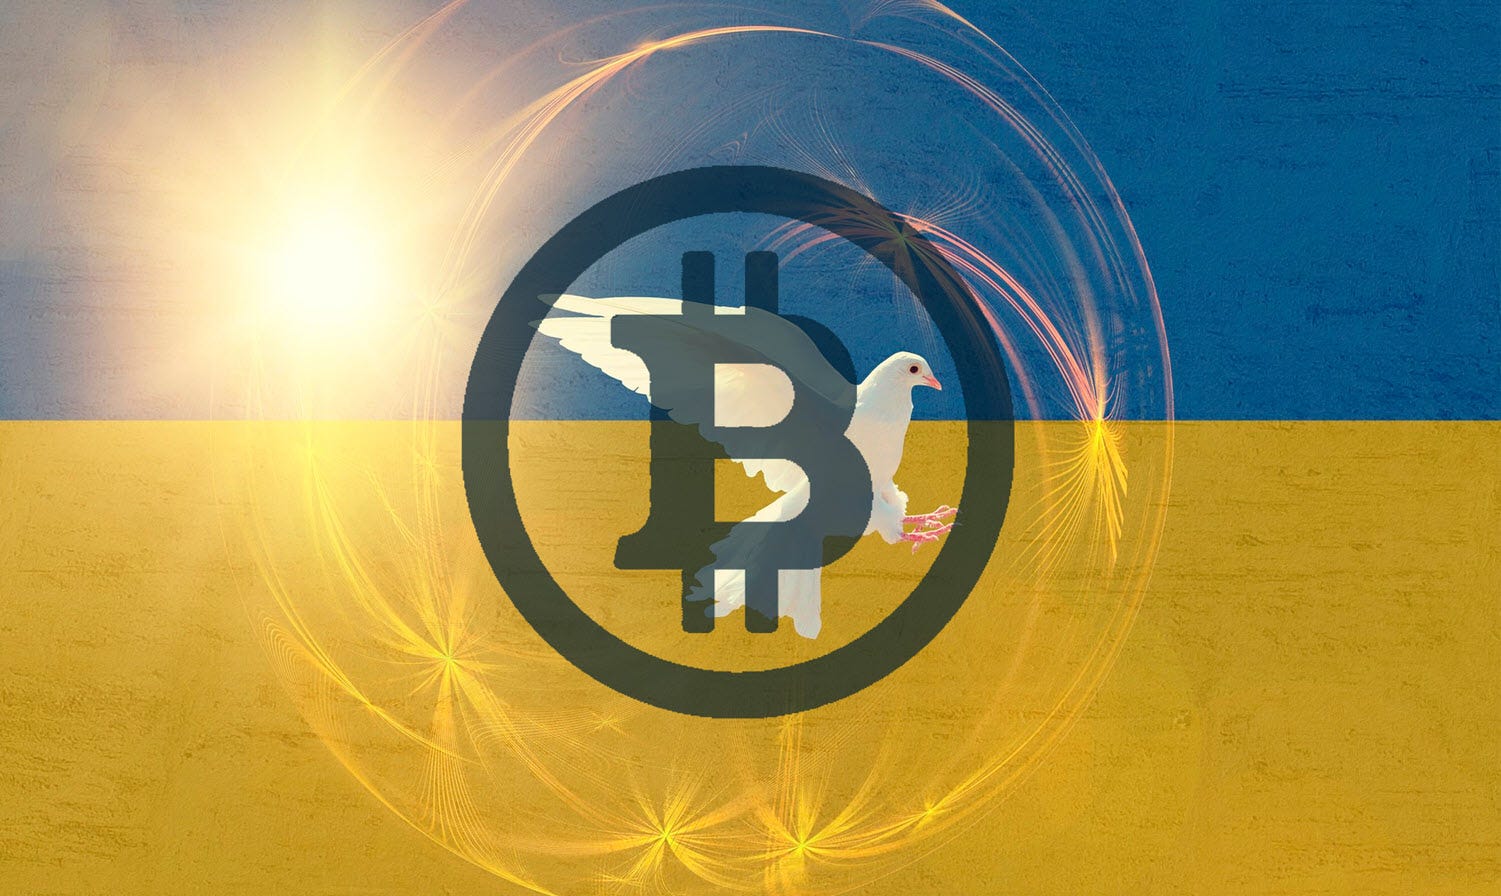 UN, Stellar Development Foundation Now Collaborating To Distribute Crypto To Help Displaced People In Ukraine